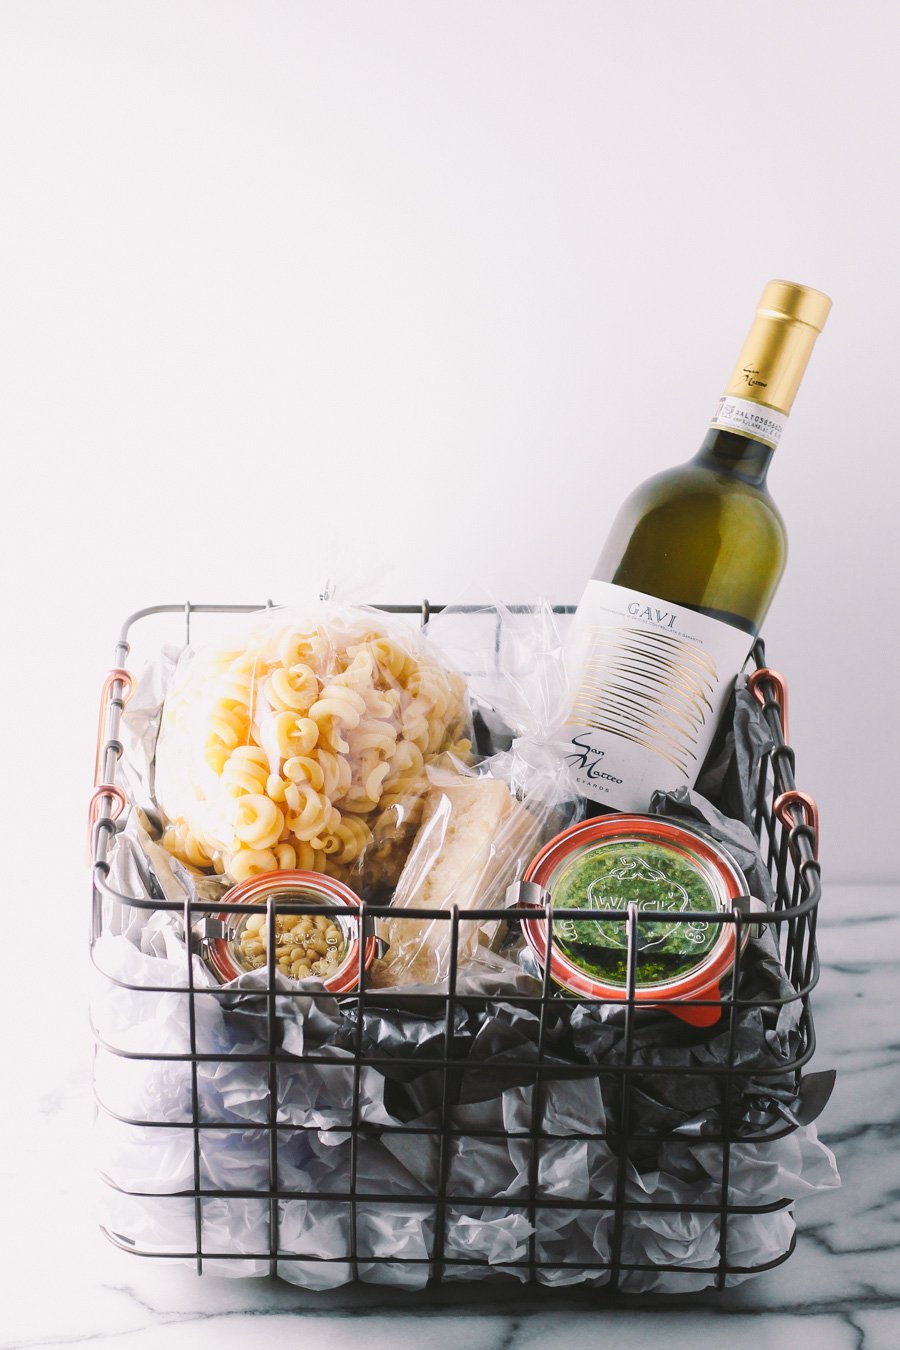 treat the italophile in your life with a homemade italian gift basket this holiday season. a beautiful basket with italian wine, good cheese & pasta, & homemade kale pesto makes perfect secret santa gift, hostess gift, or christmas gift for any italian-lover in your life! | a plays well with butter holiday gift basket series